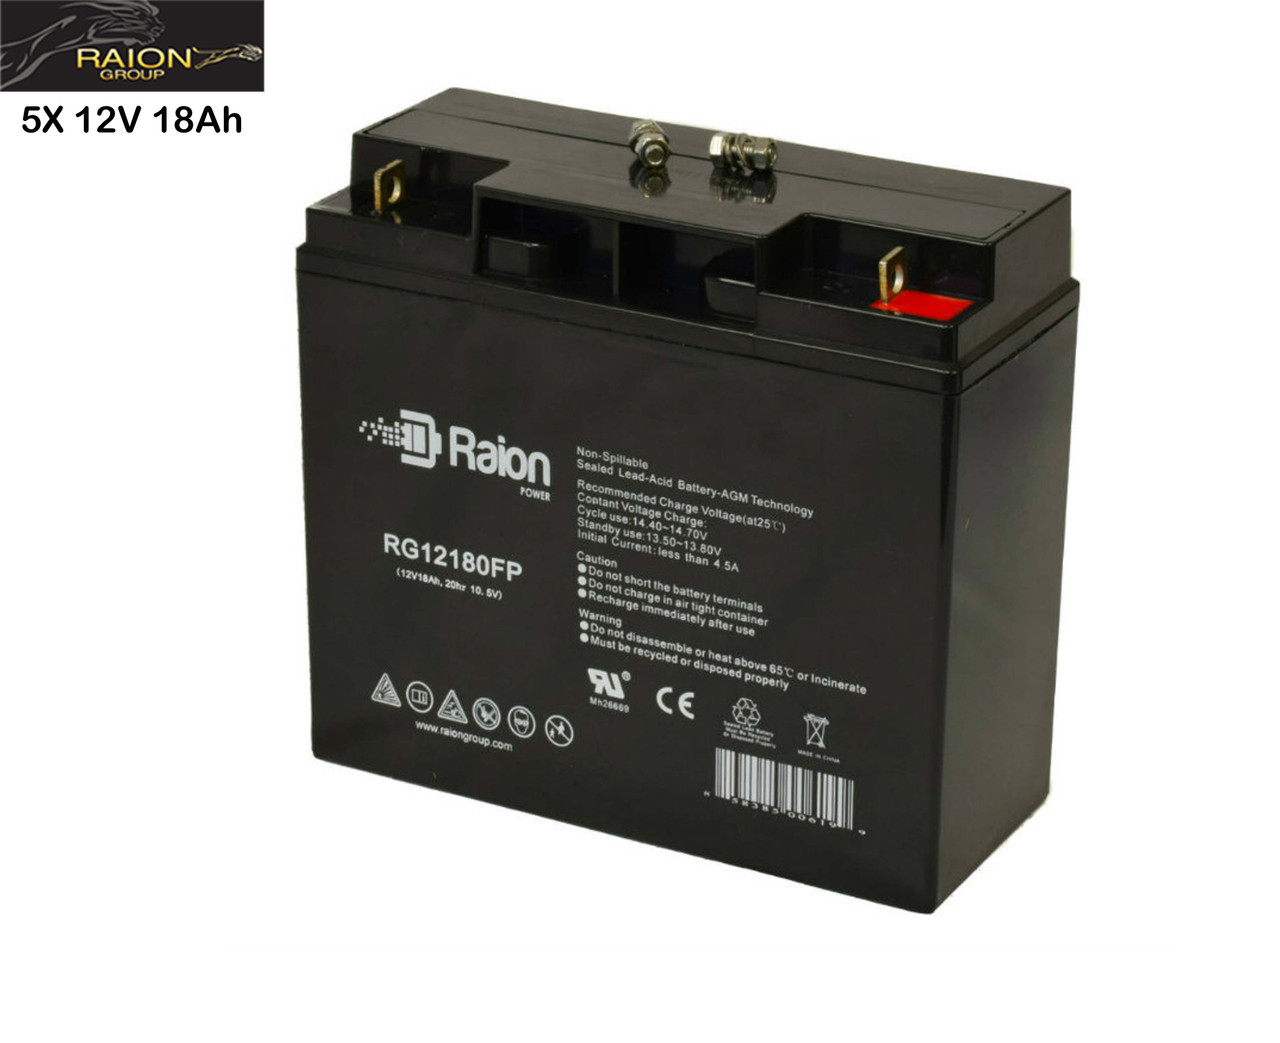 Raion Power Replacement 12V 18Ah Battery for Fun E-Cycle Three Wheeled E-Scooter Froggy - 5 Pack